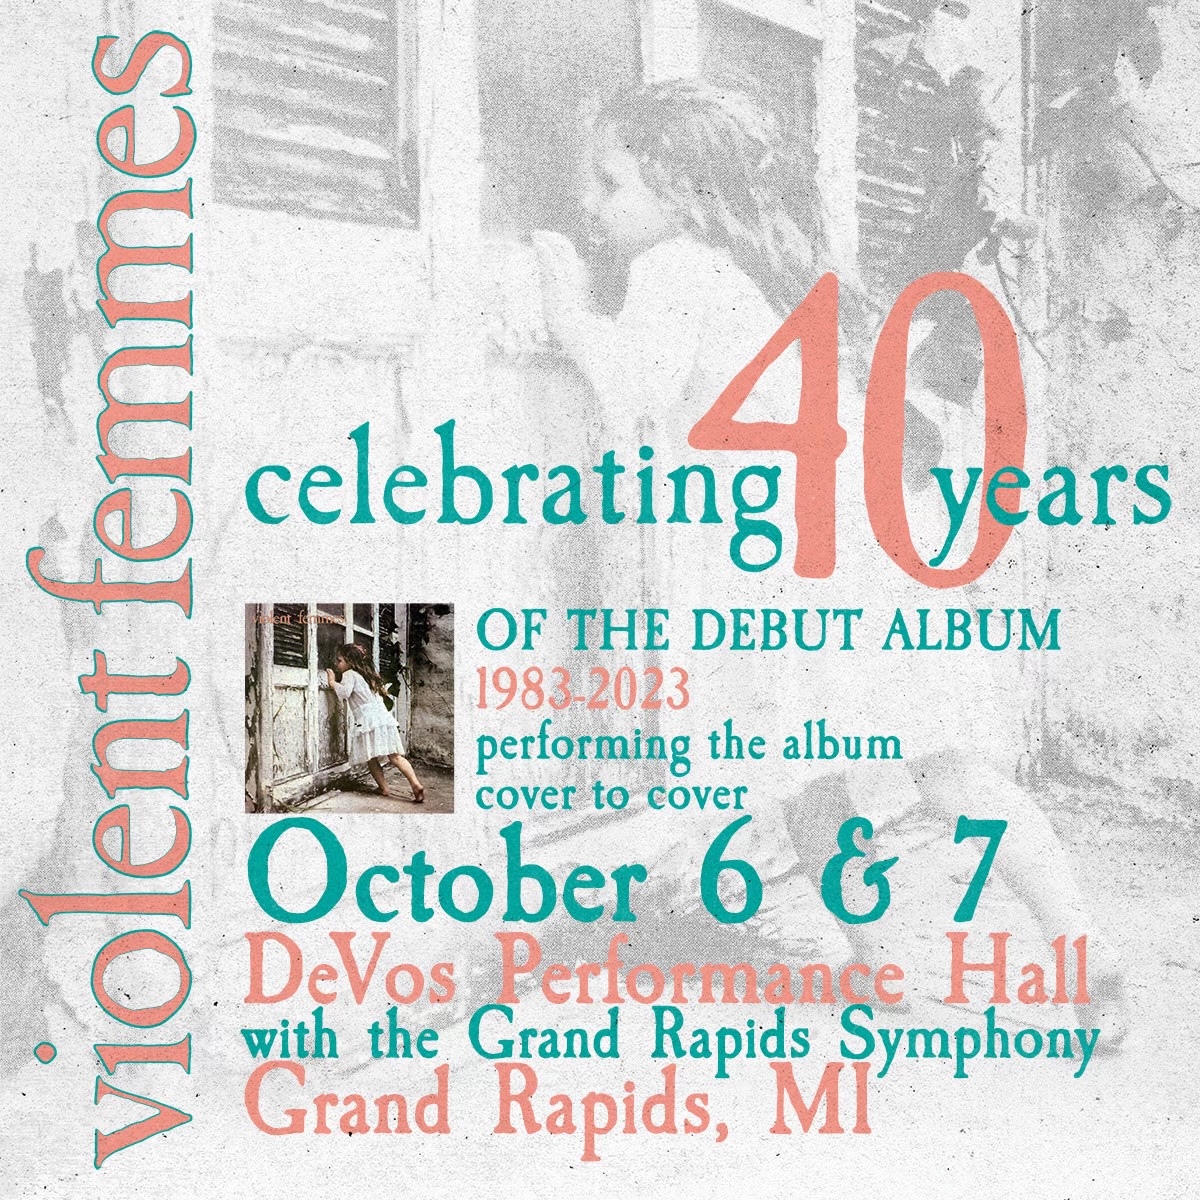 Grand Rapids! Avoid ticket fees! Get your tickets EARLY at the @GRSymphony Box Office from 7/25 - 7/28. Limited tickets for each of their 10/6 & 10/7 shows will be exclusively available in-person or over the phone during box office hours. For more info: grsymphony.org/violent-femmes